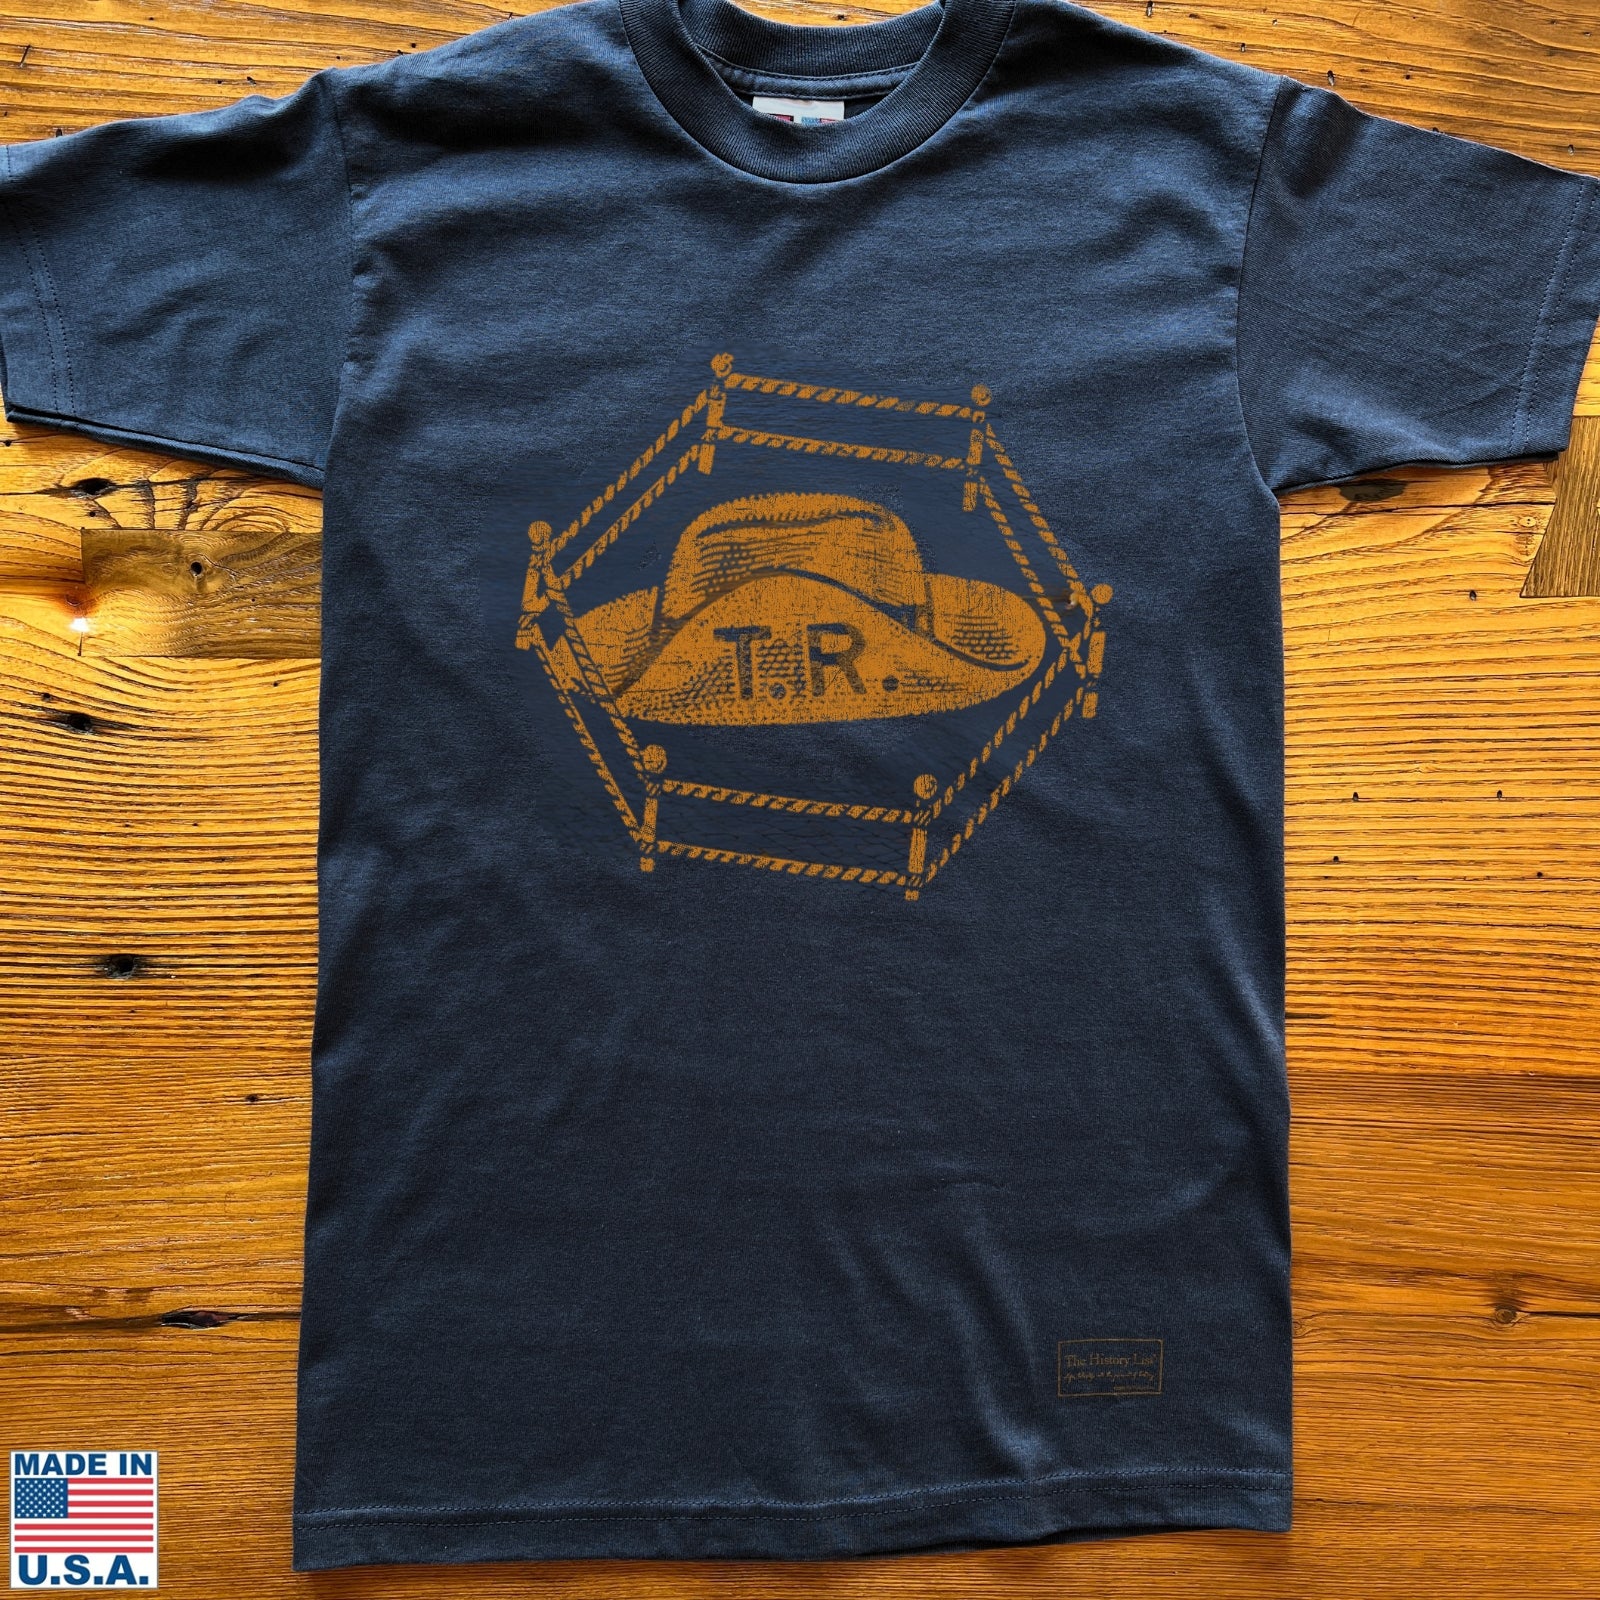 Teddy Roosevelt “Hat in the ring” presidential campaign shirt